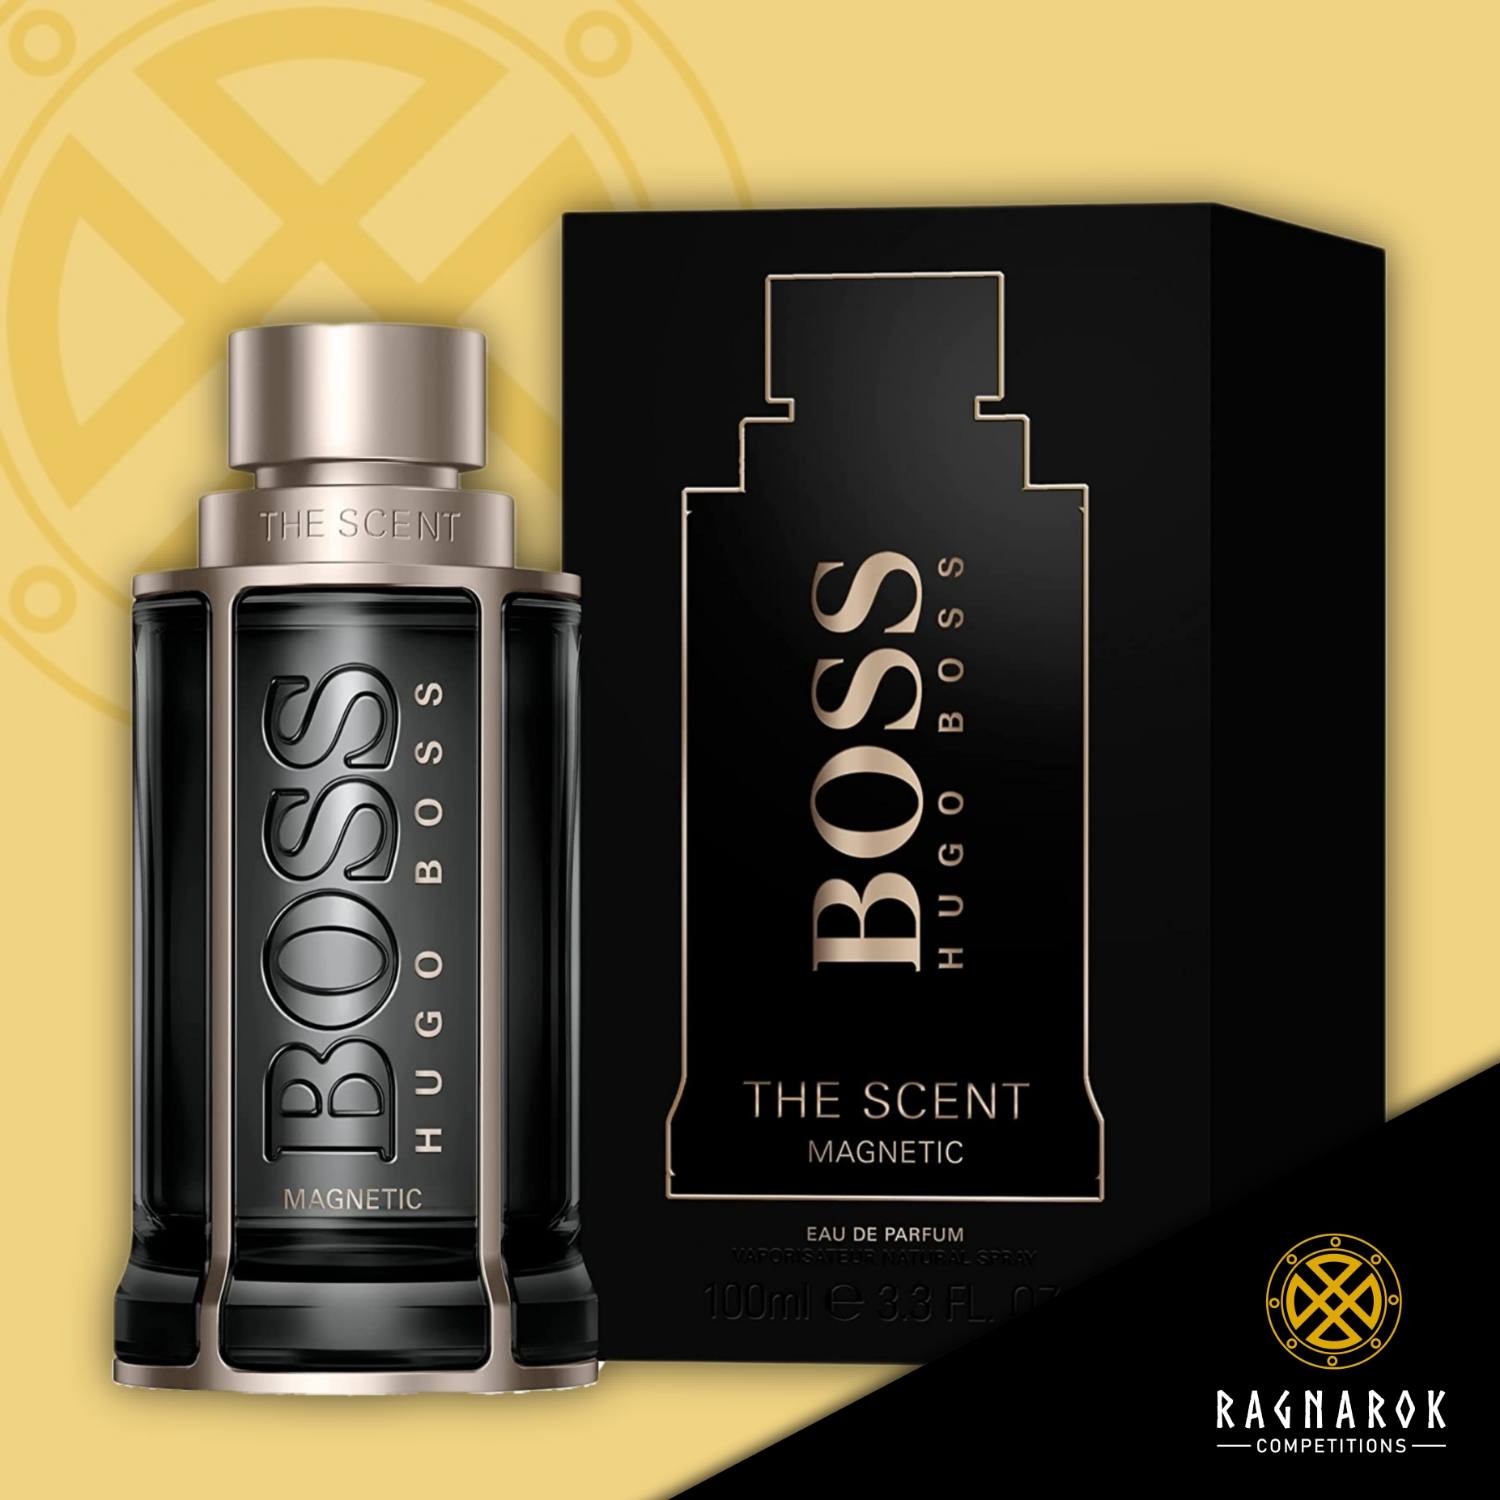 BOSS The Scent Magnetic Parfum 100ml - Ragnarok Competitions